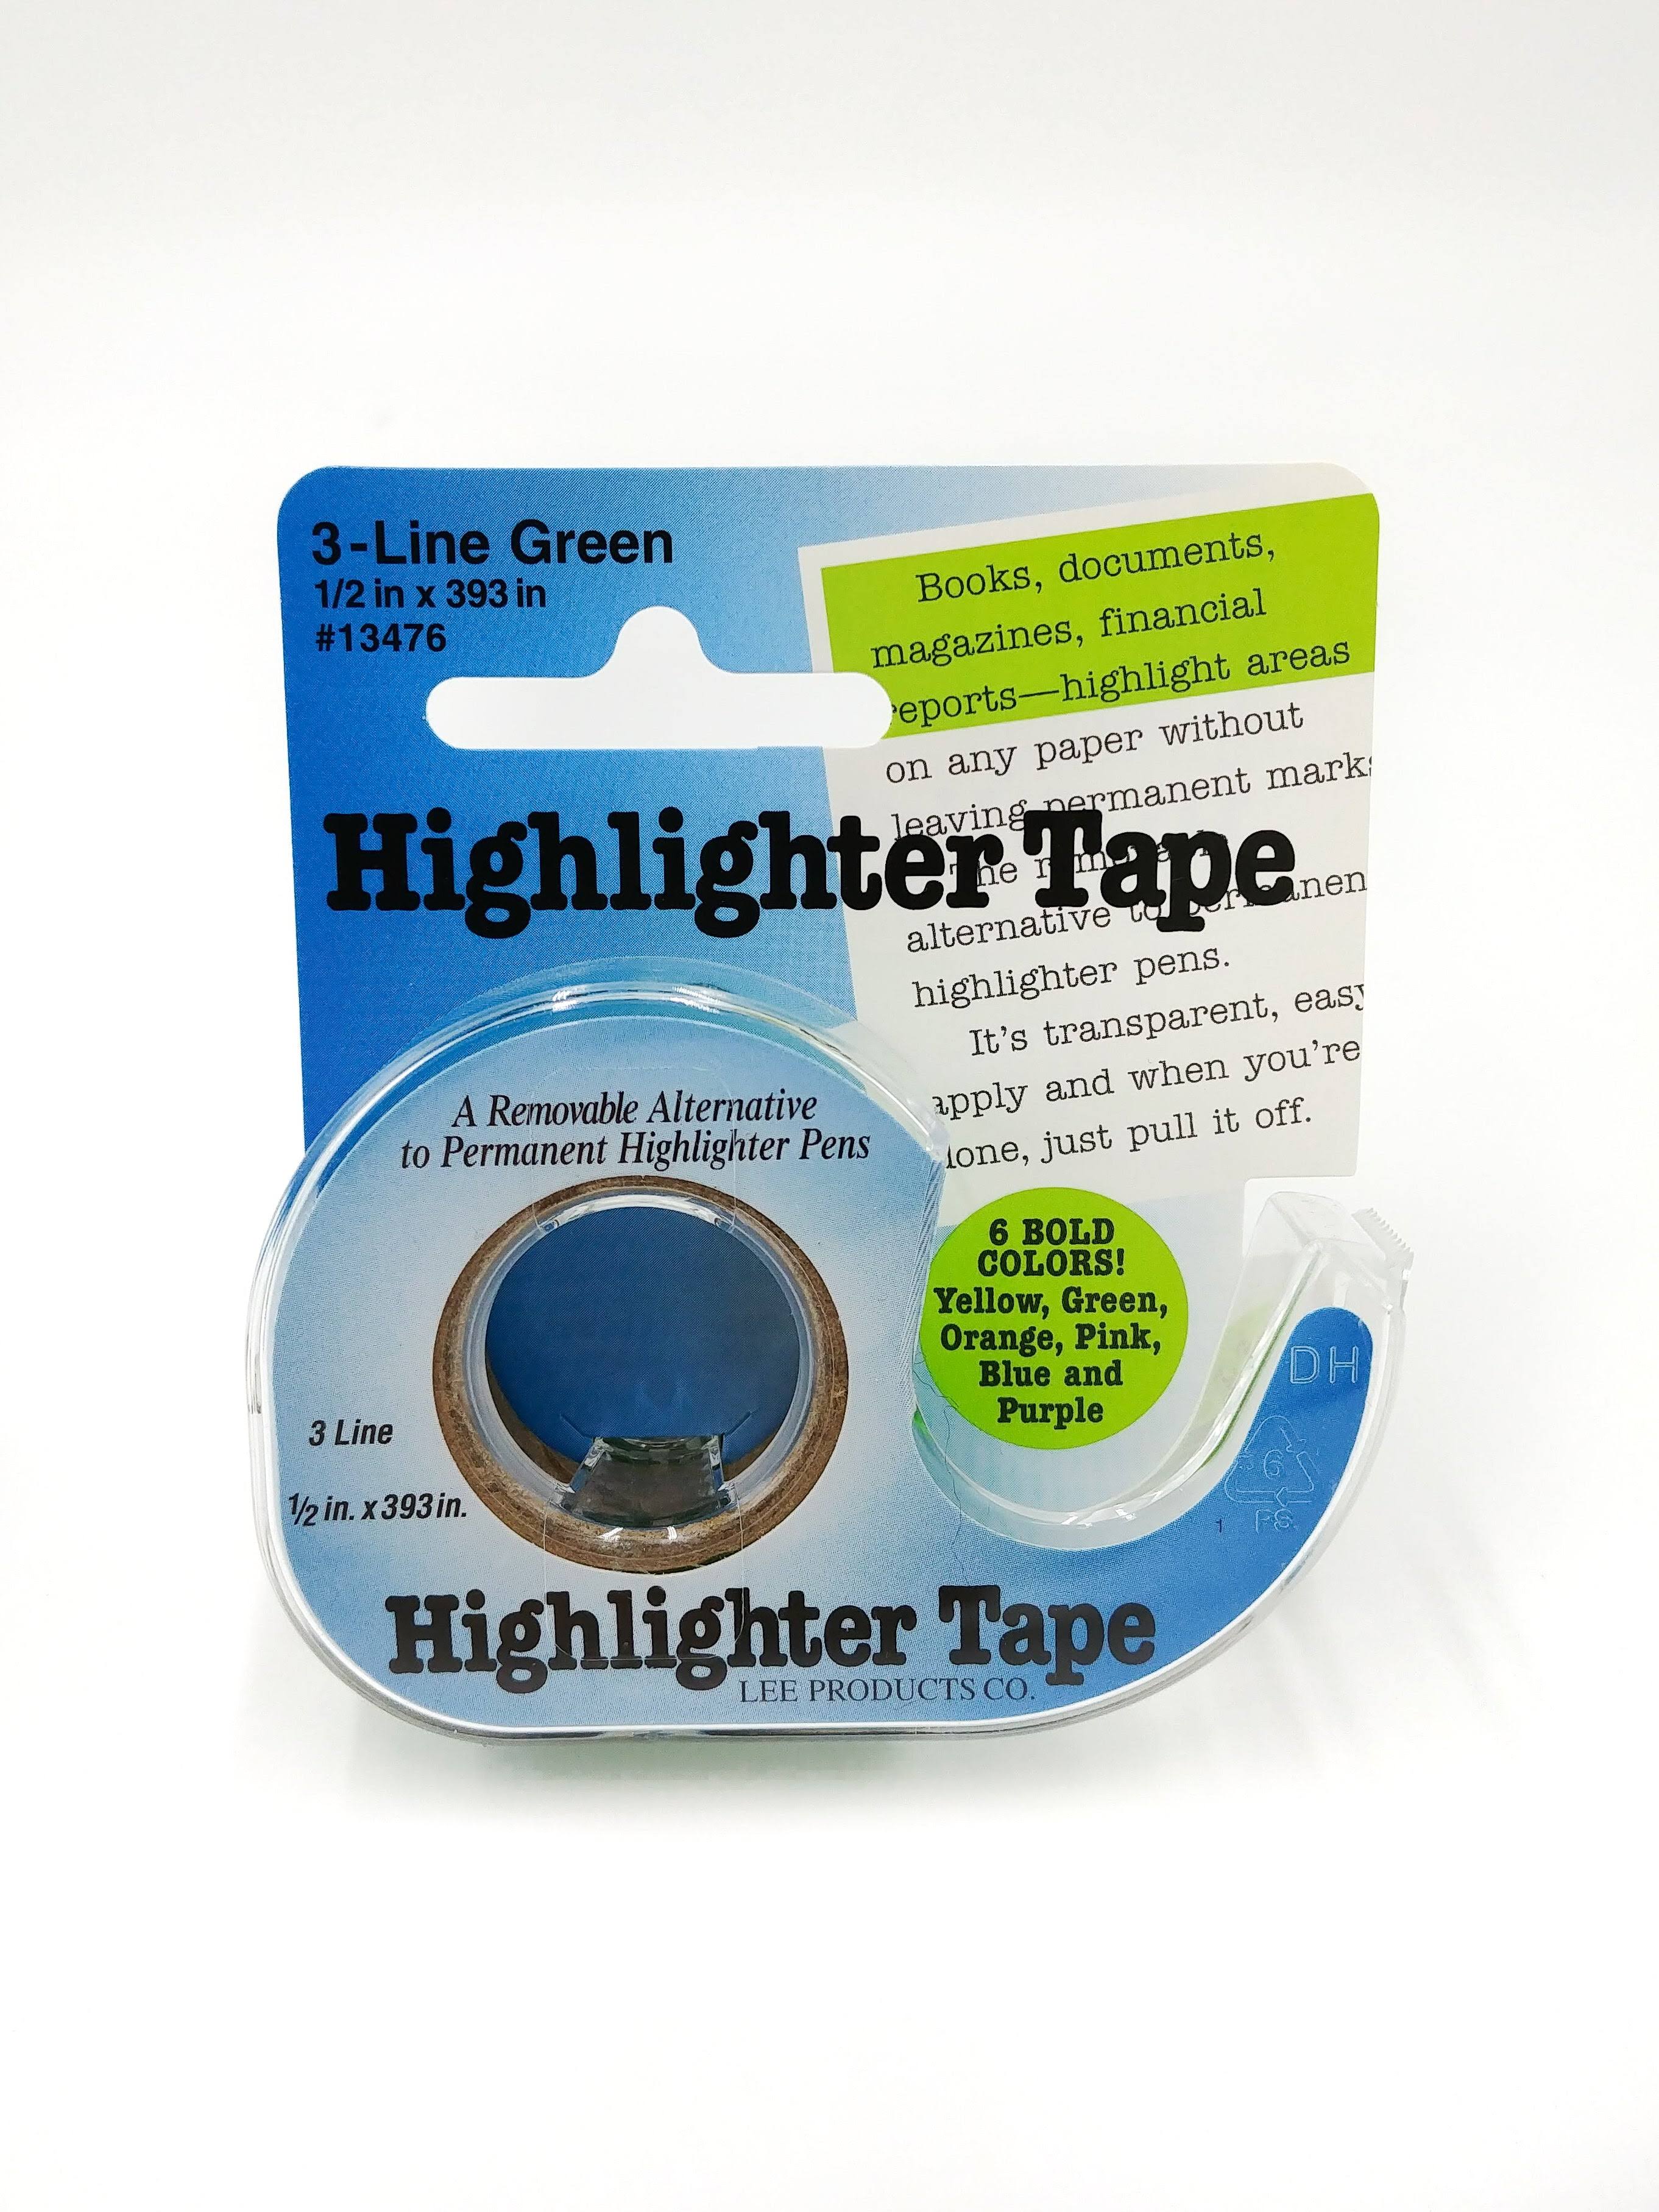 Lee Products Highlighter Tape - 3 Line, Green, 1/2" X 393"